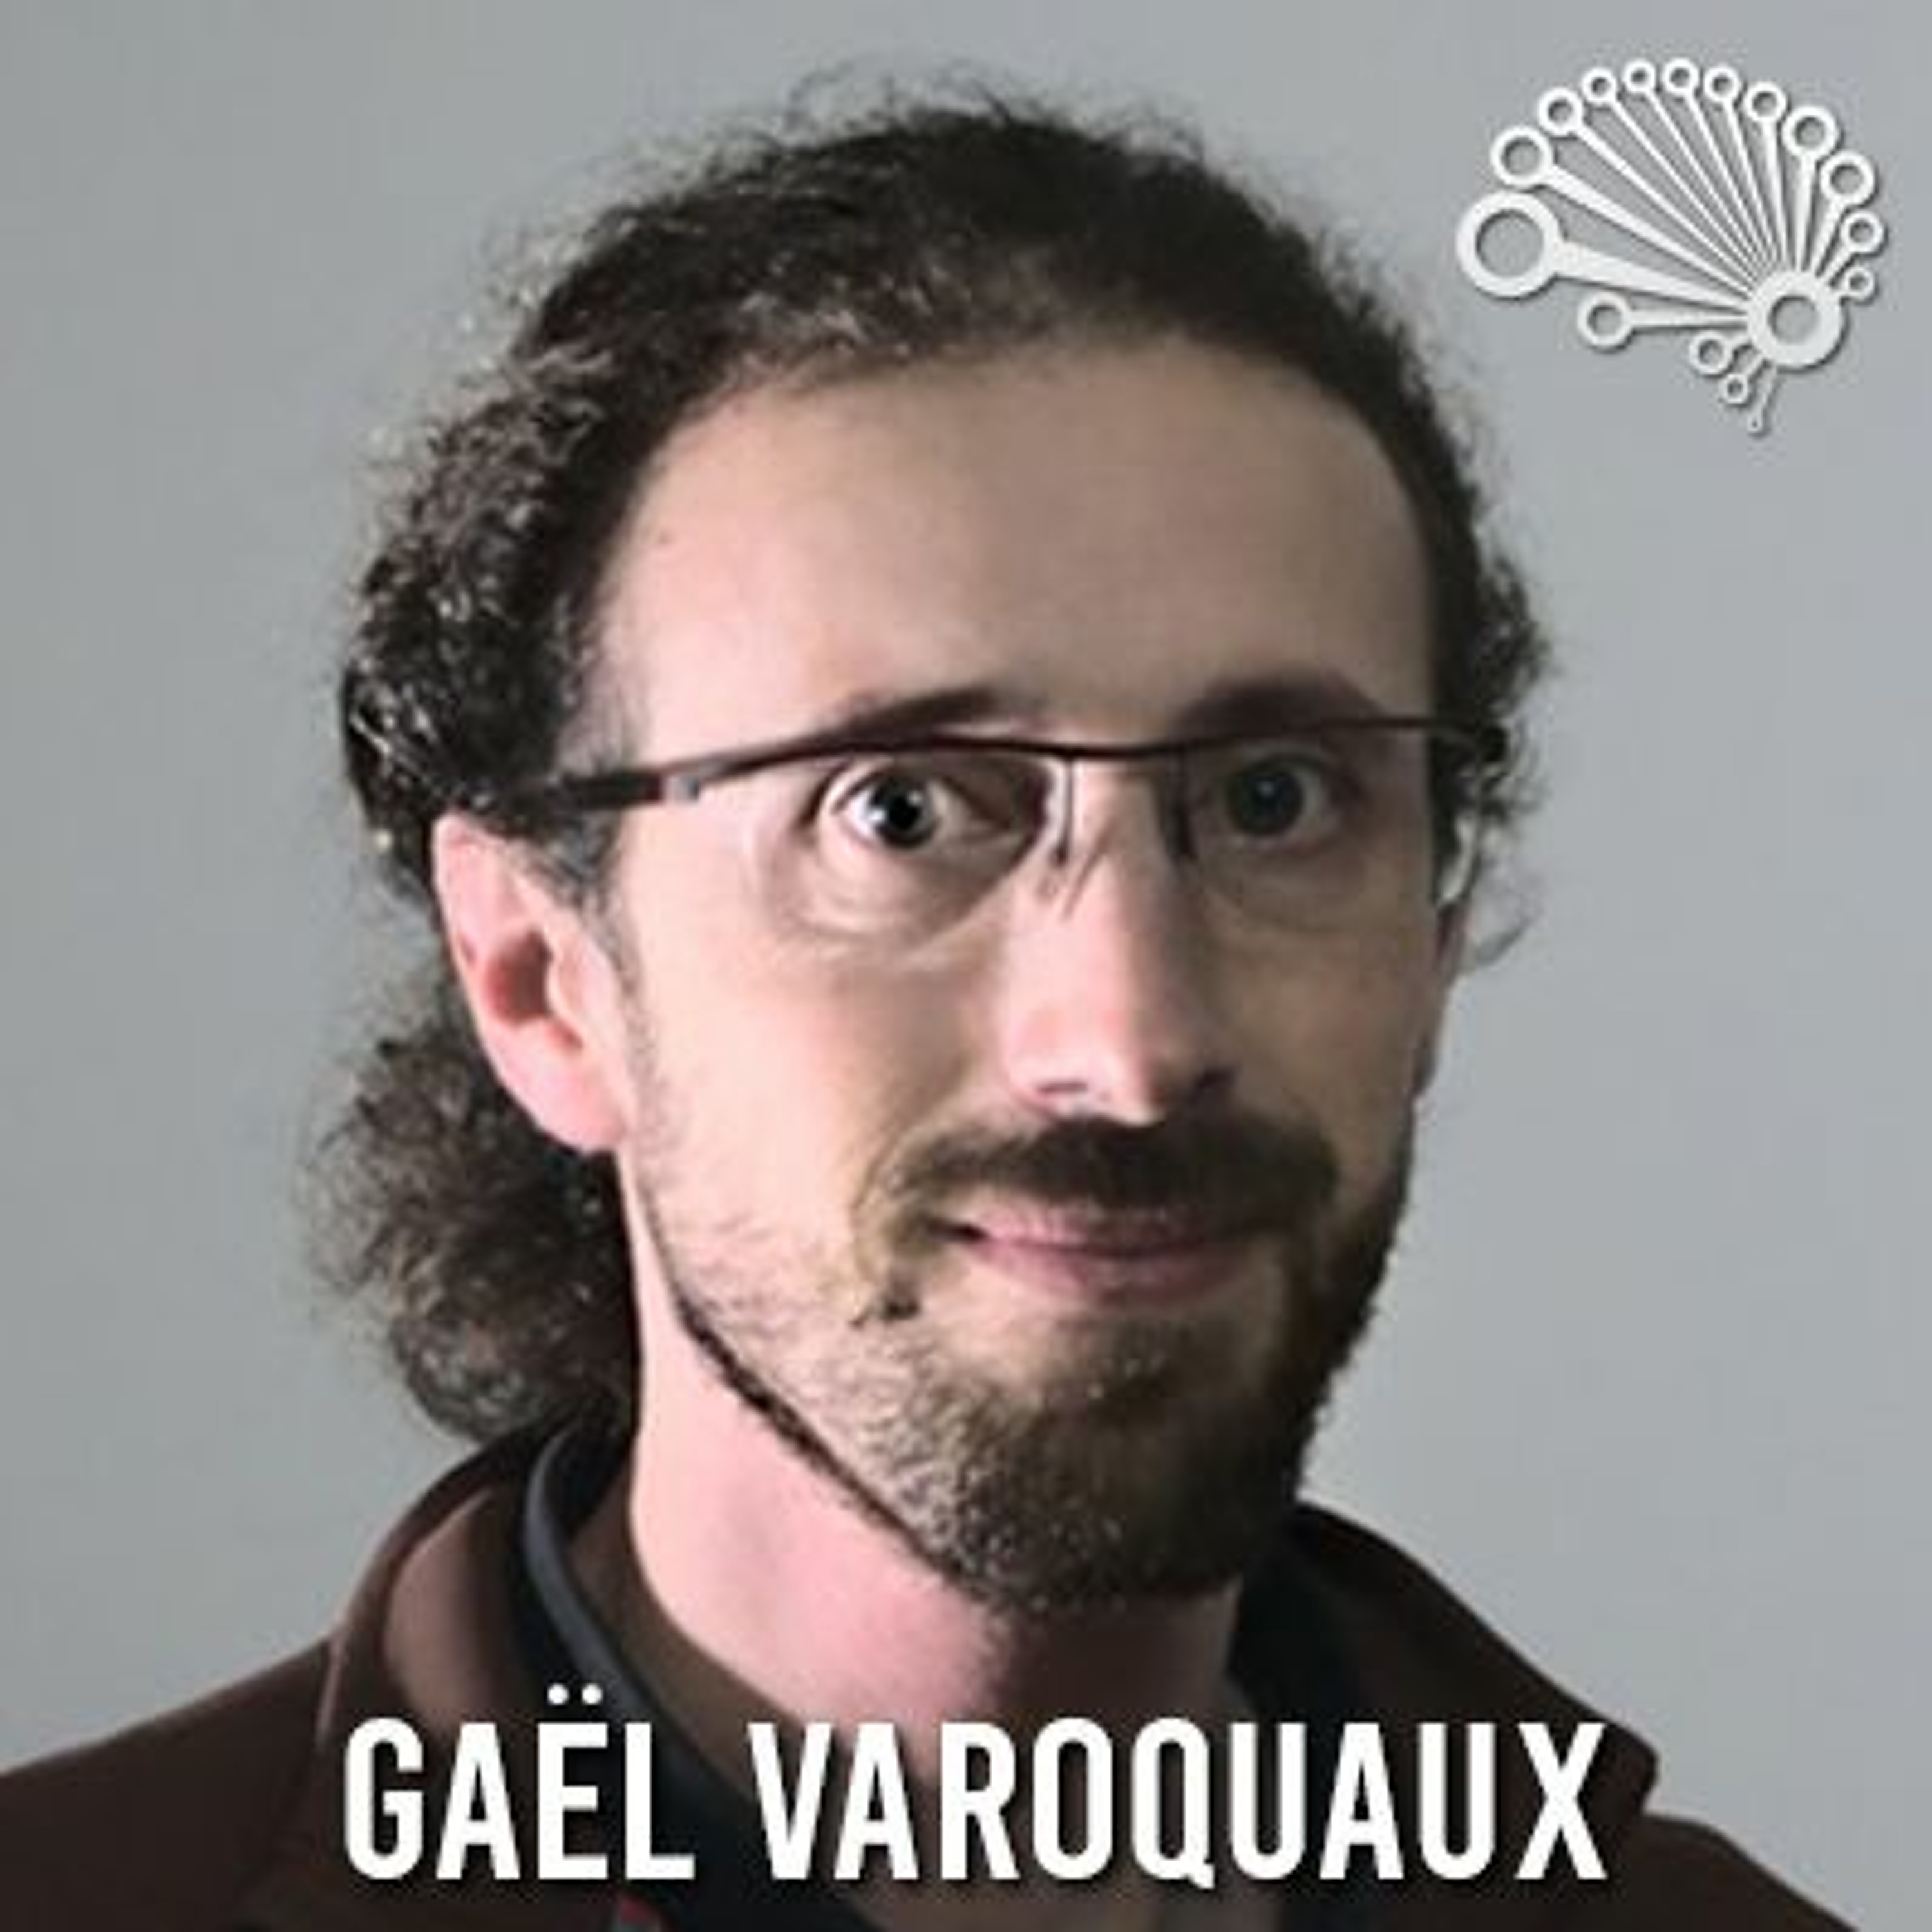 737: scikit-learn’s Past, Present and Future, with scikit-learn co-founder Dr. Gaël Varoquaux